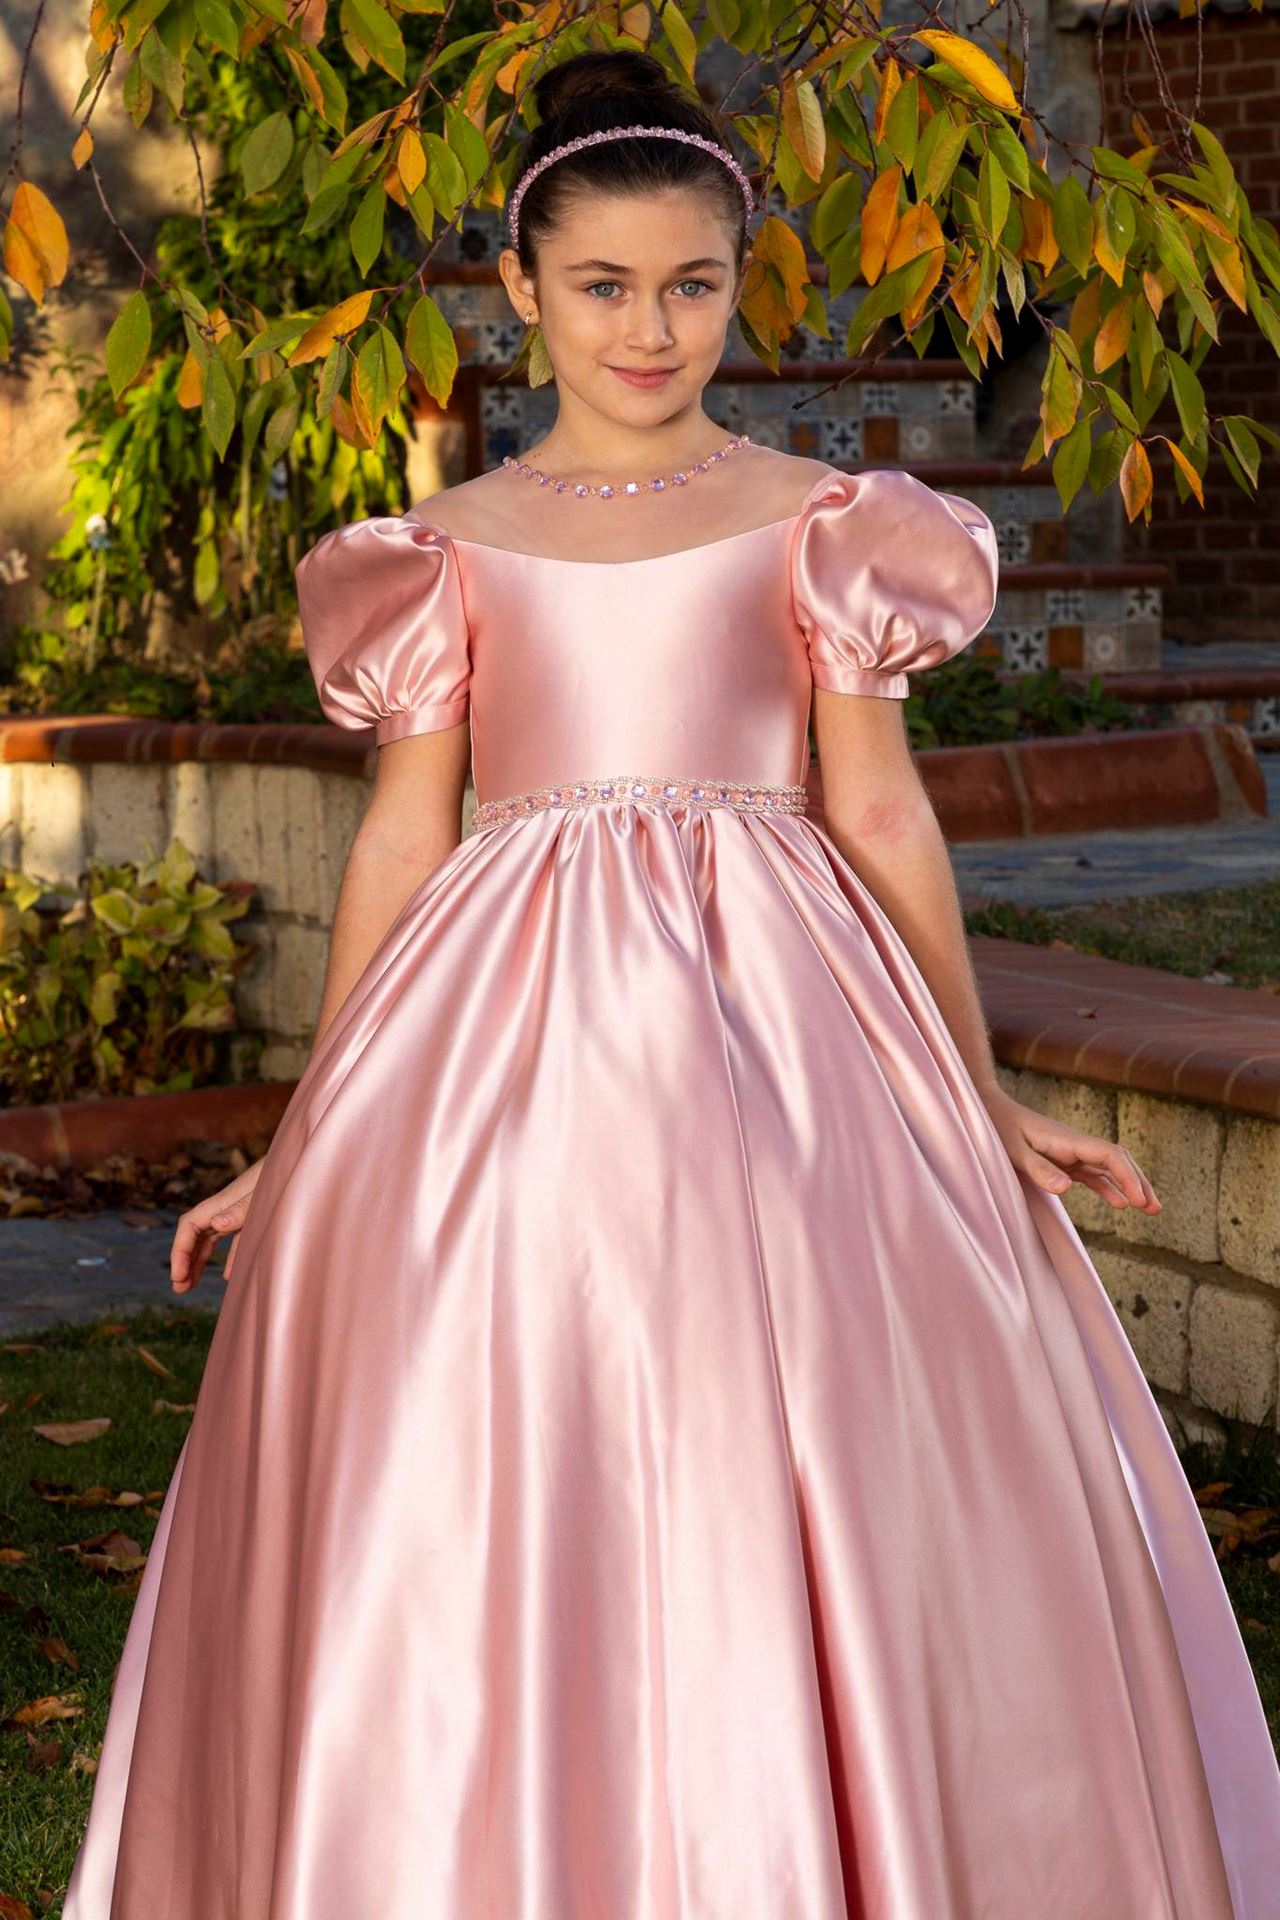 Allure 7-11 Years Old Girl Dress 30084 Powder